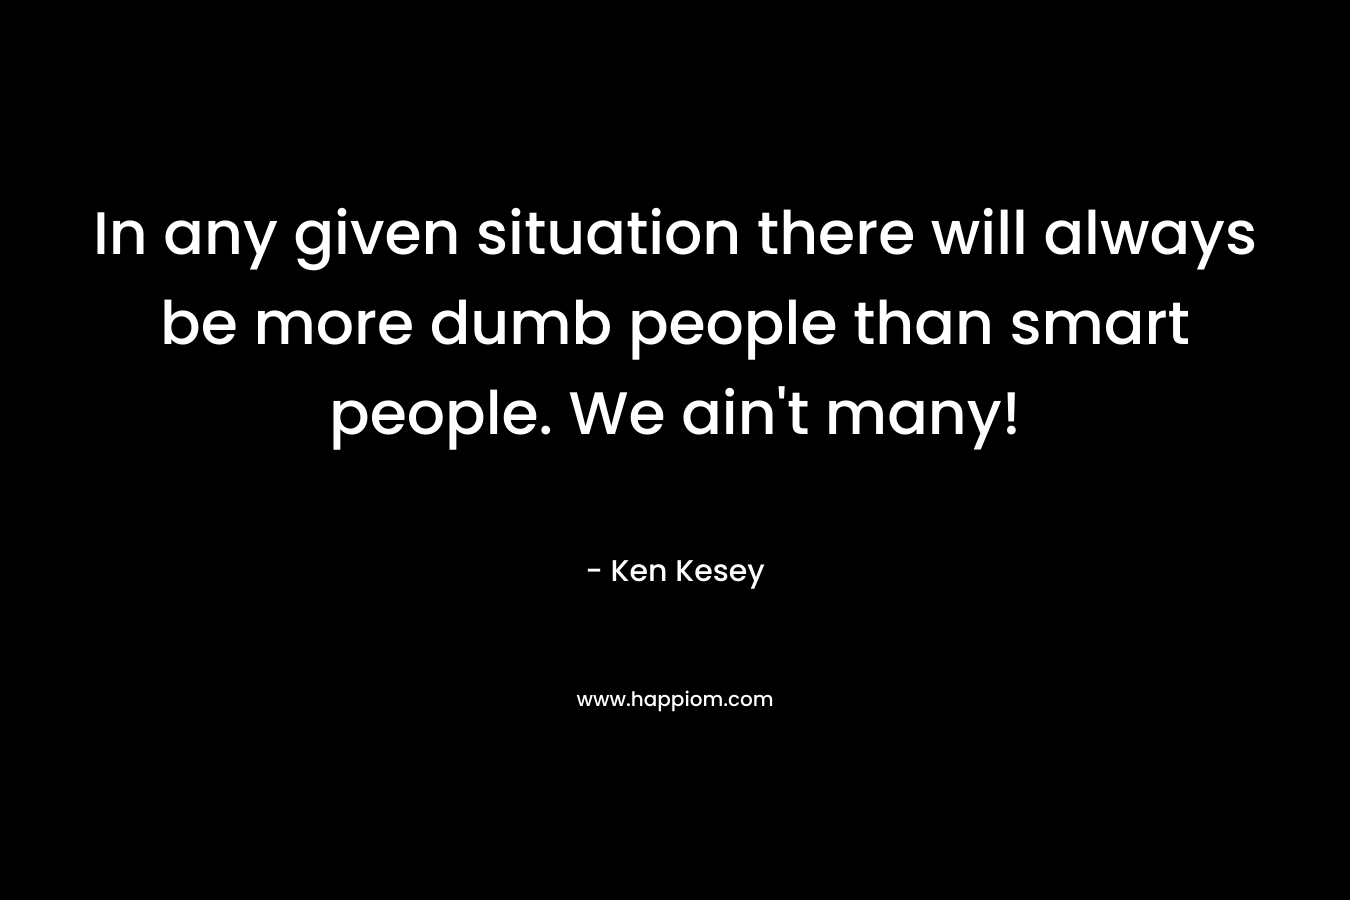 In any given situation there will always be more dumb people than smart people. We ain’t many! – Ken Kesey